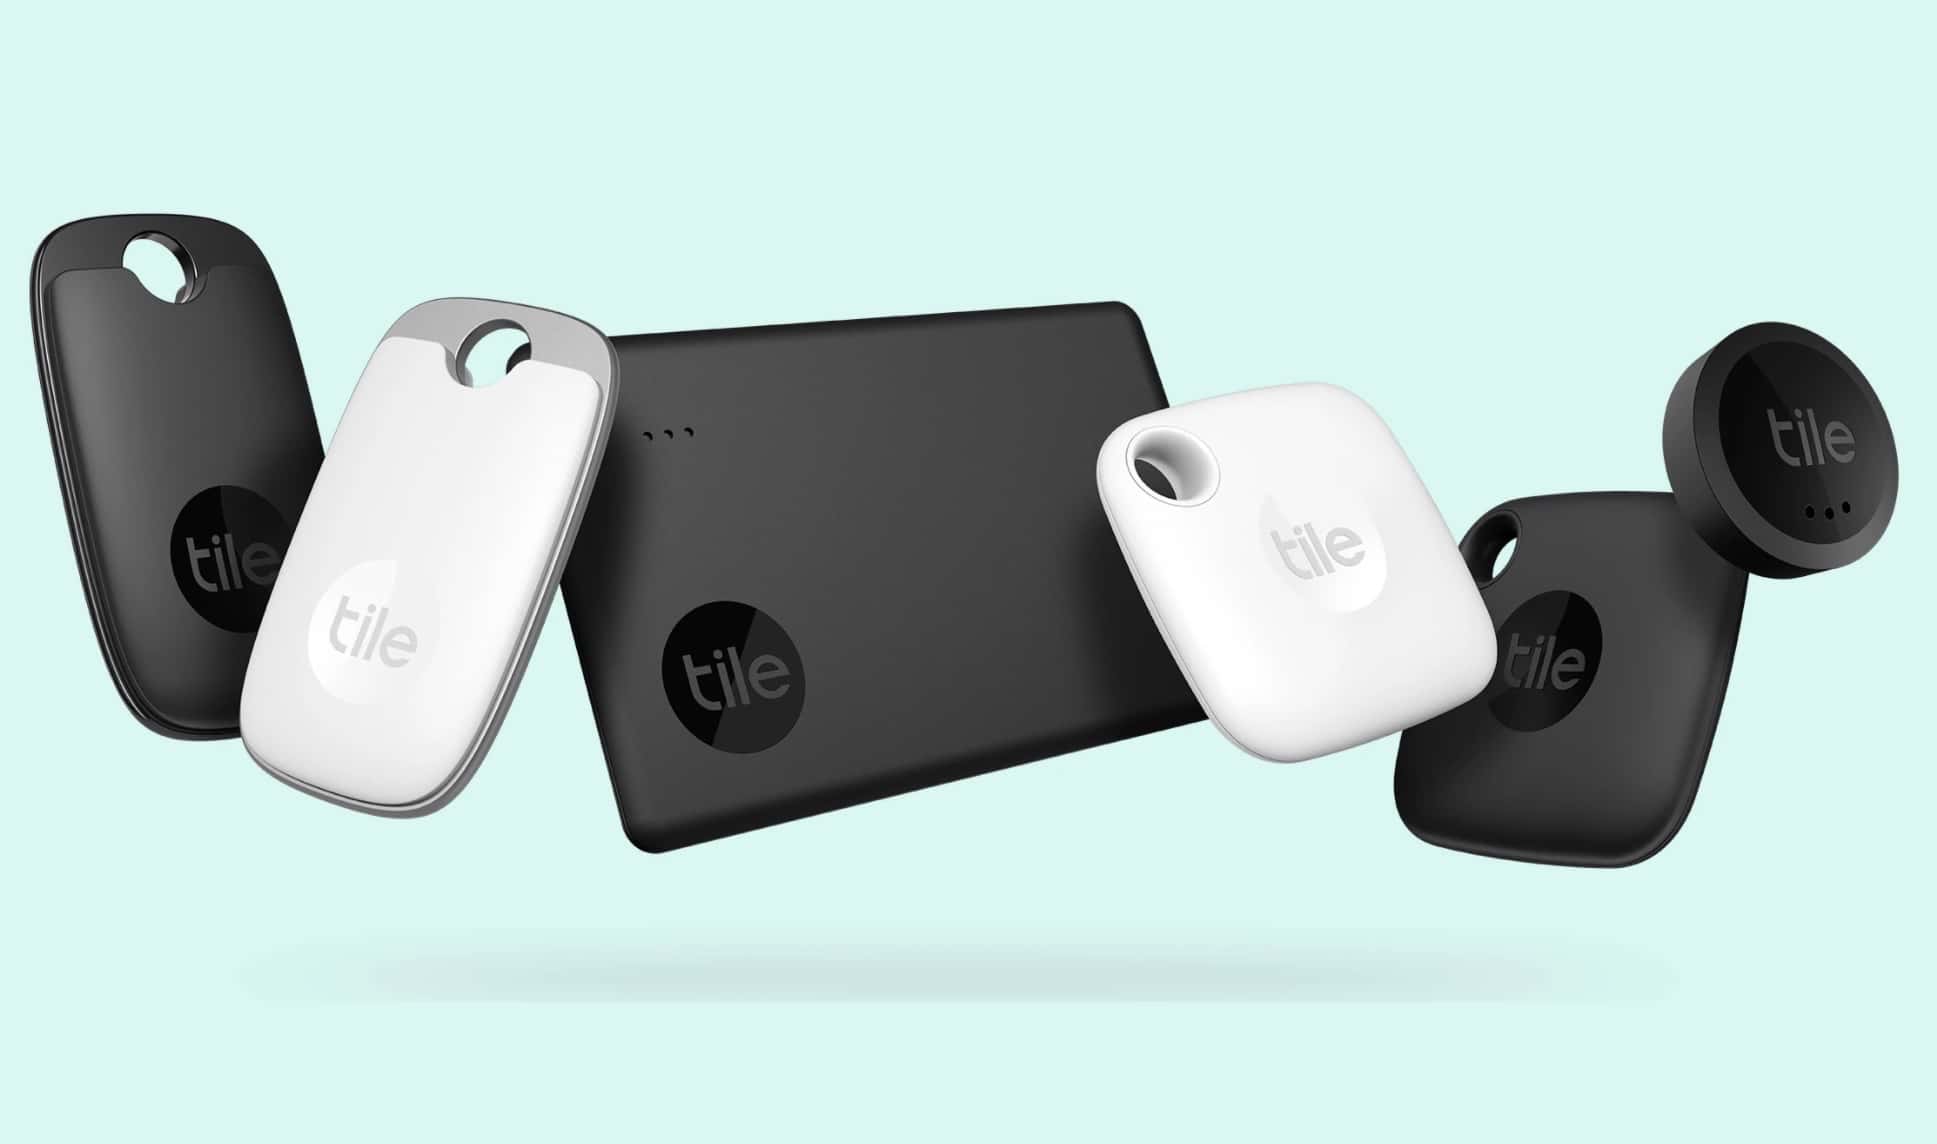 Tile announces a new lineup of Bluetooth trackers, UWB enabled Tile Ultra coming in 2022